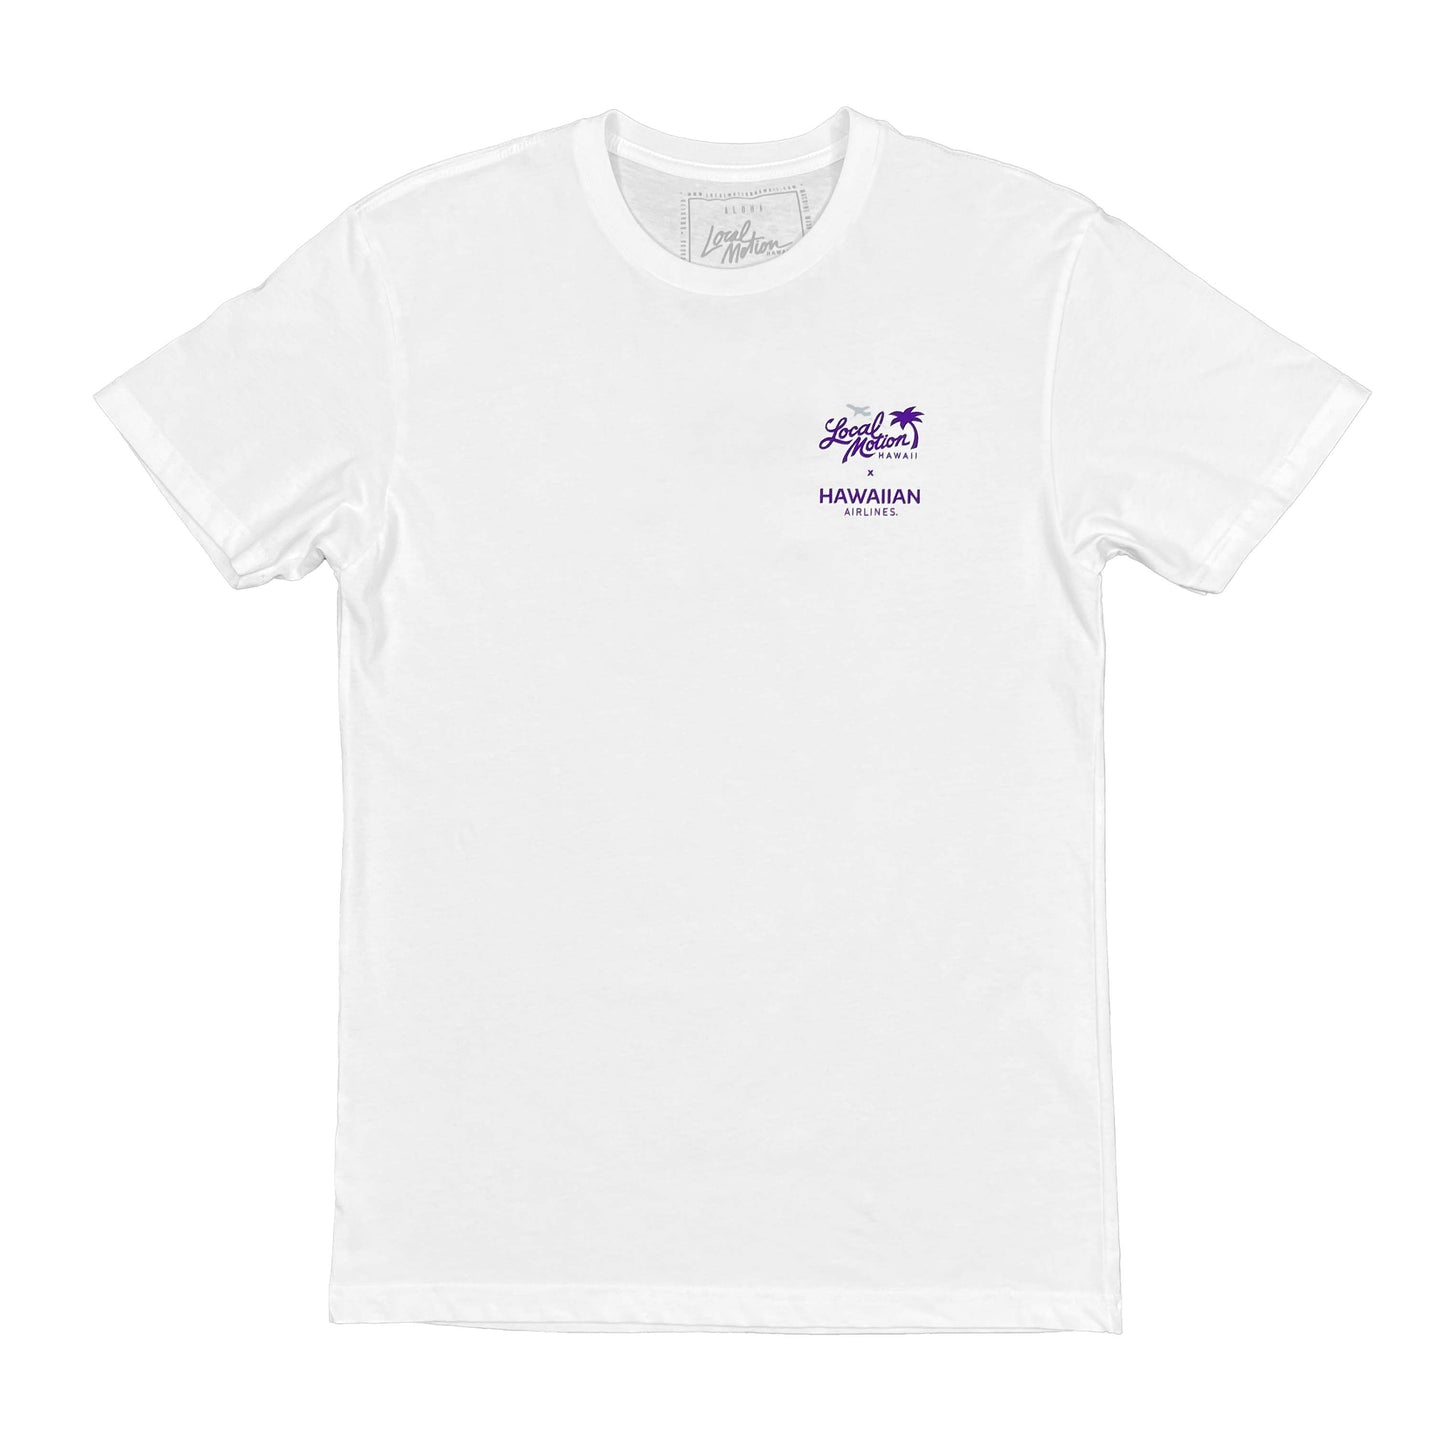 HAWAIIAN AIRLINES x LM 2023 "CARE FOR THE WORLD" TEE